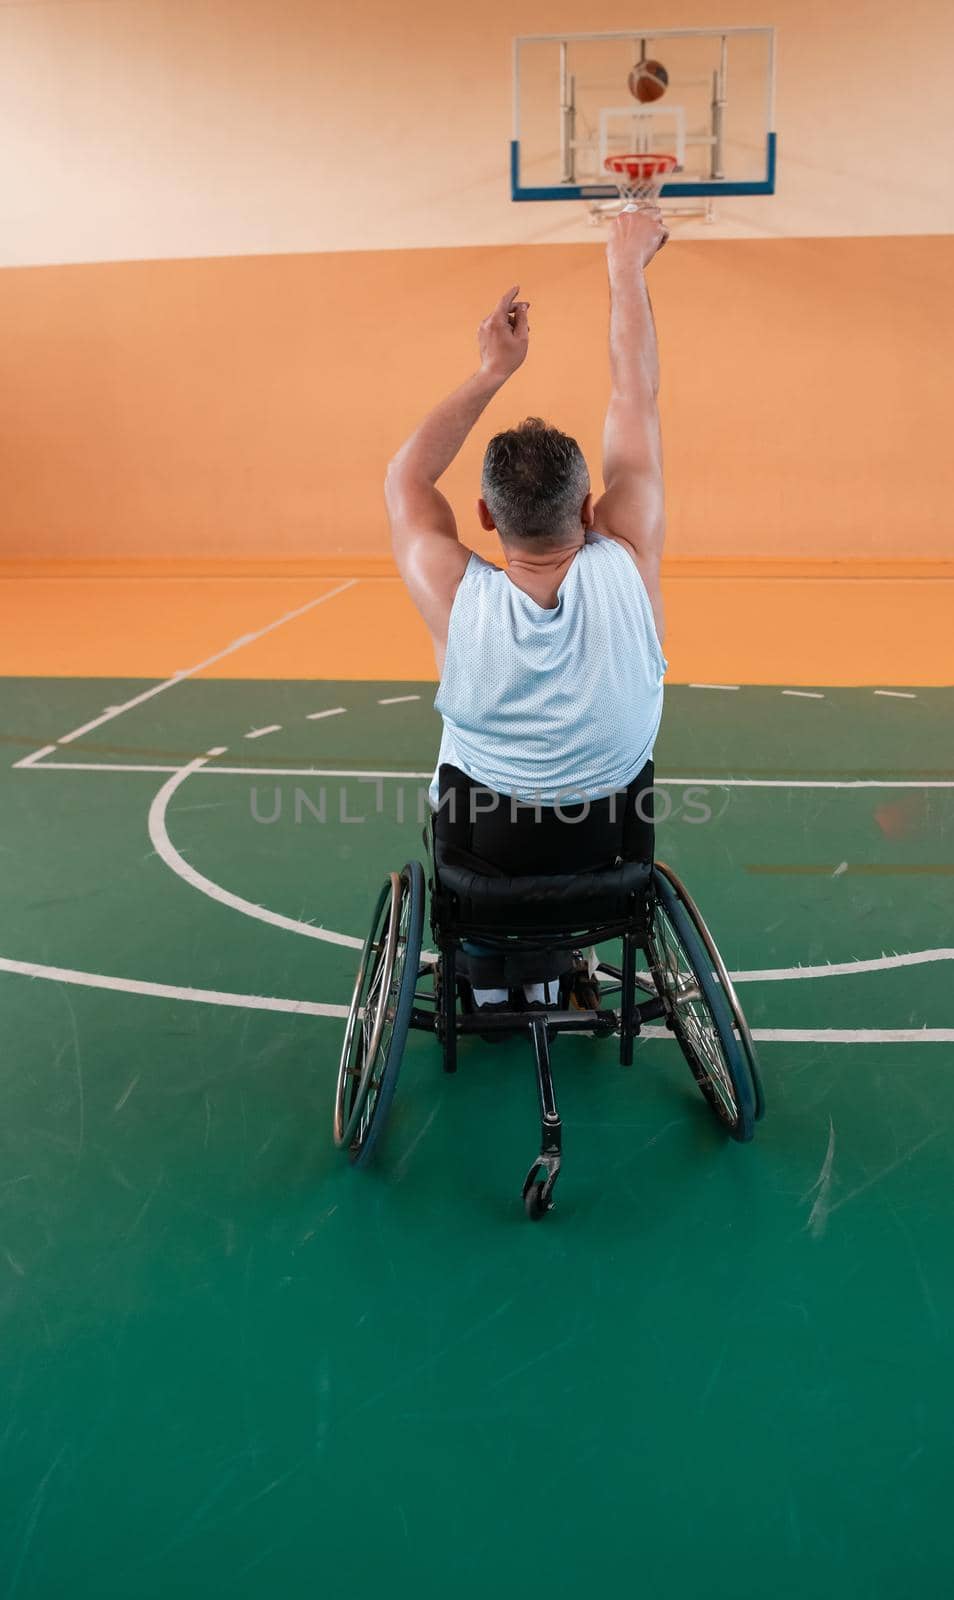 a cameraman with professional equipment records a match of the national team in a wheelchair playing a match in the arena by dotshock